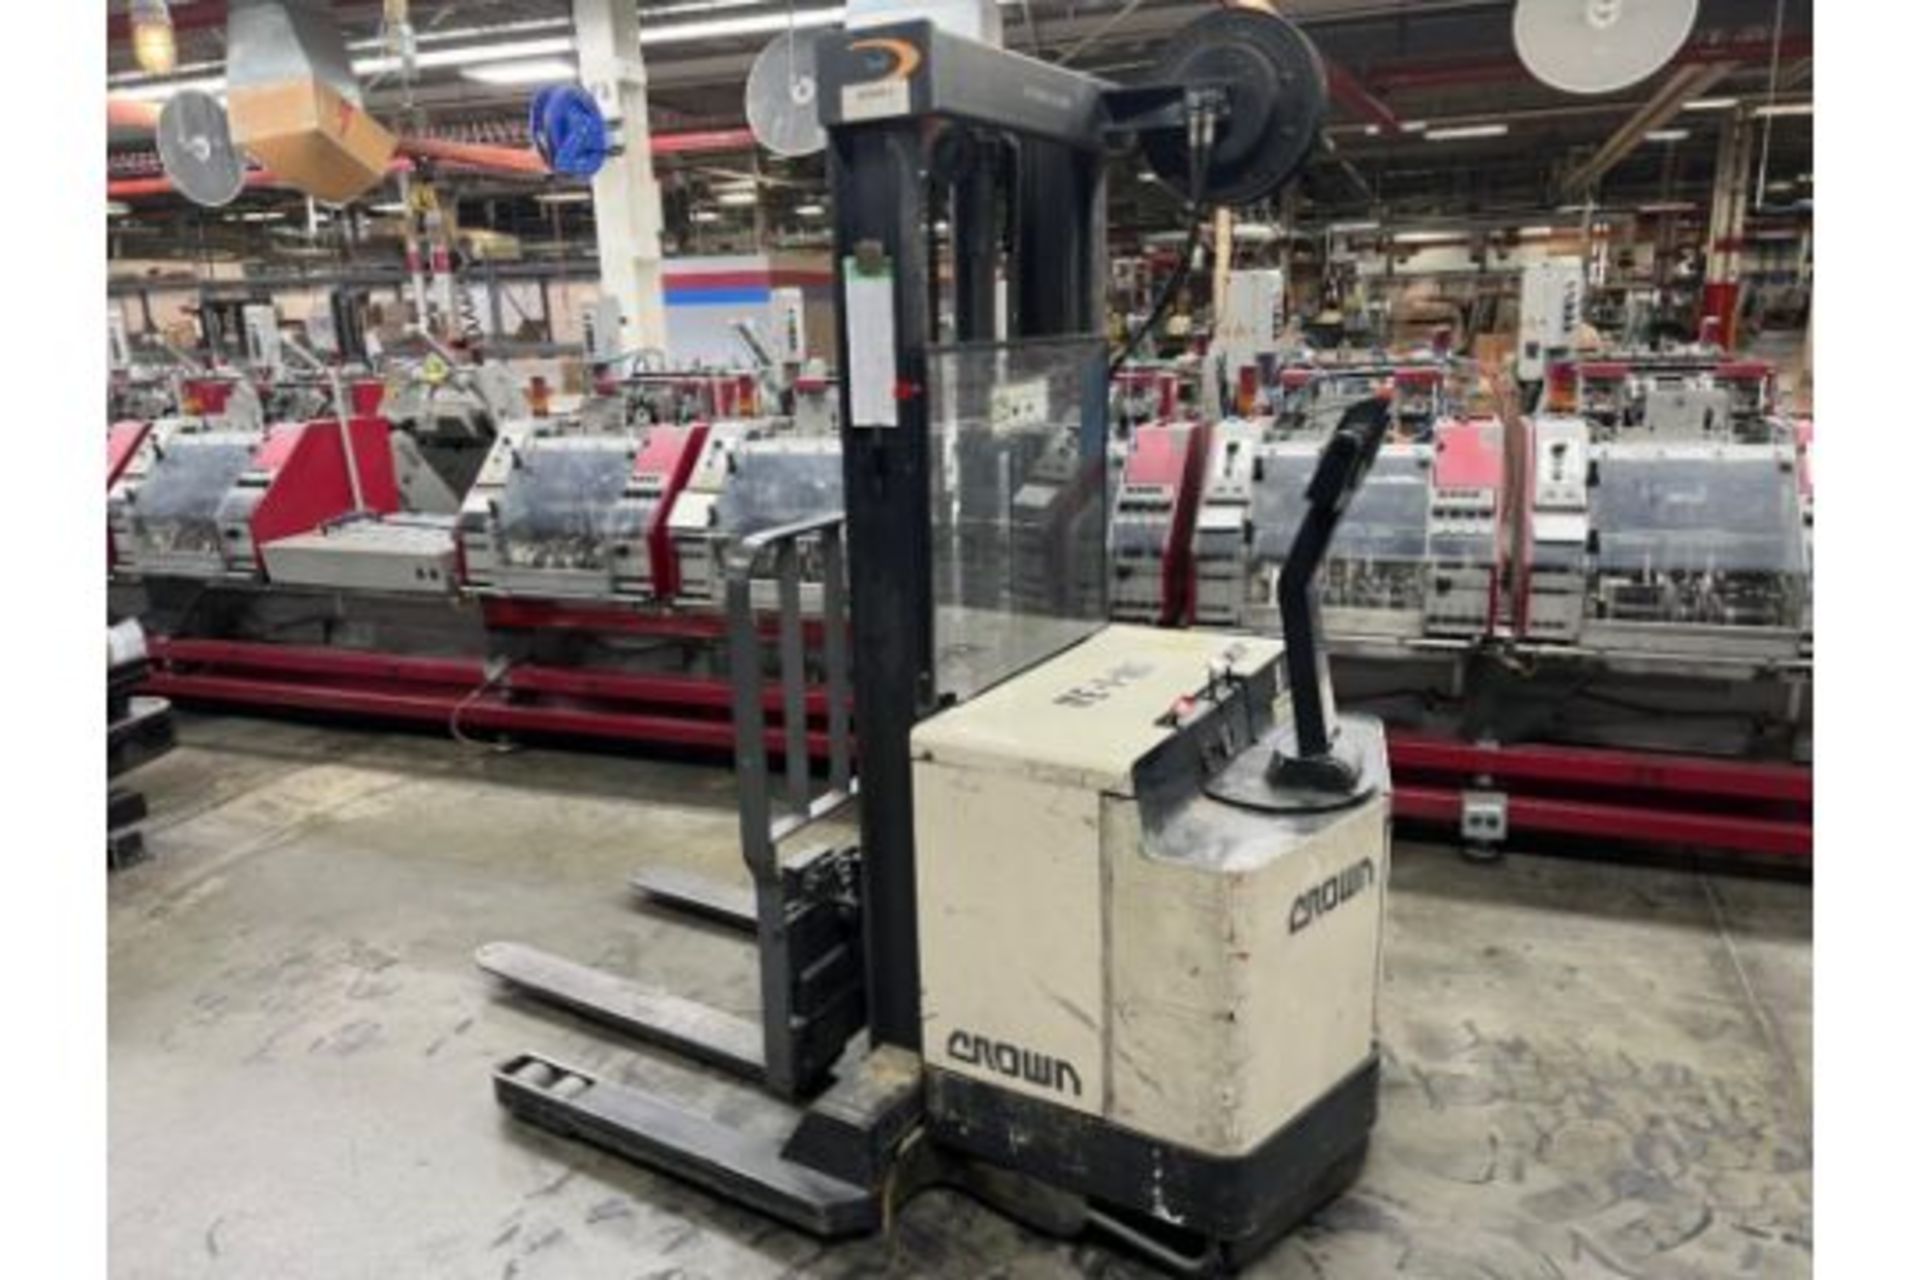 Crown 3500 lb. Model 40WTL Electric Stacker, S/N 6A219826, 24 Volt, 2-Stage Mast (west bindery) (